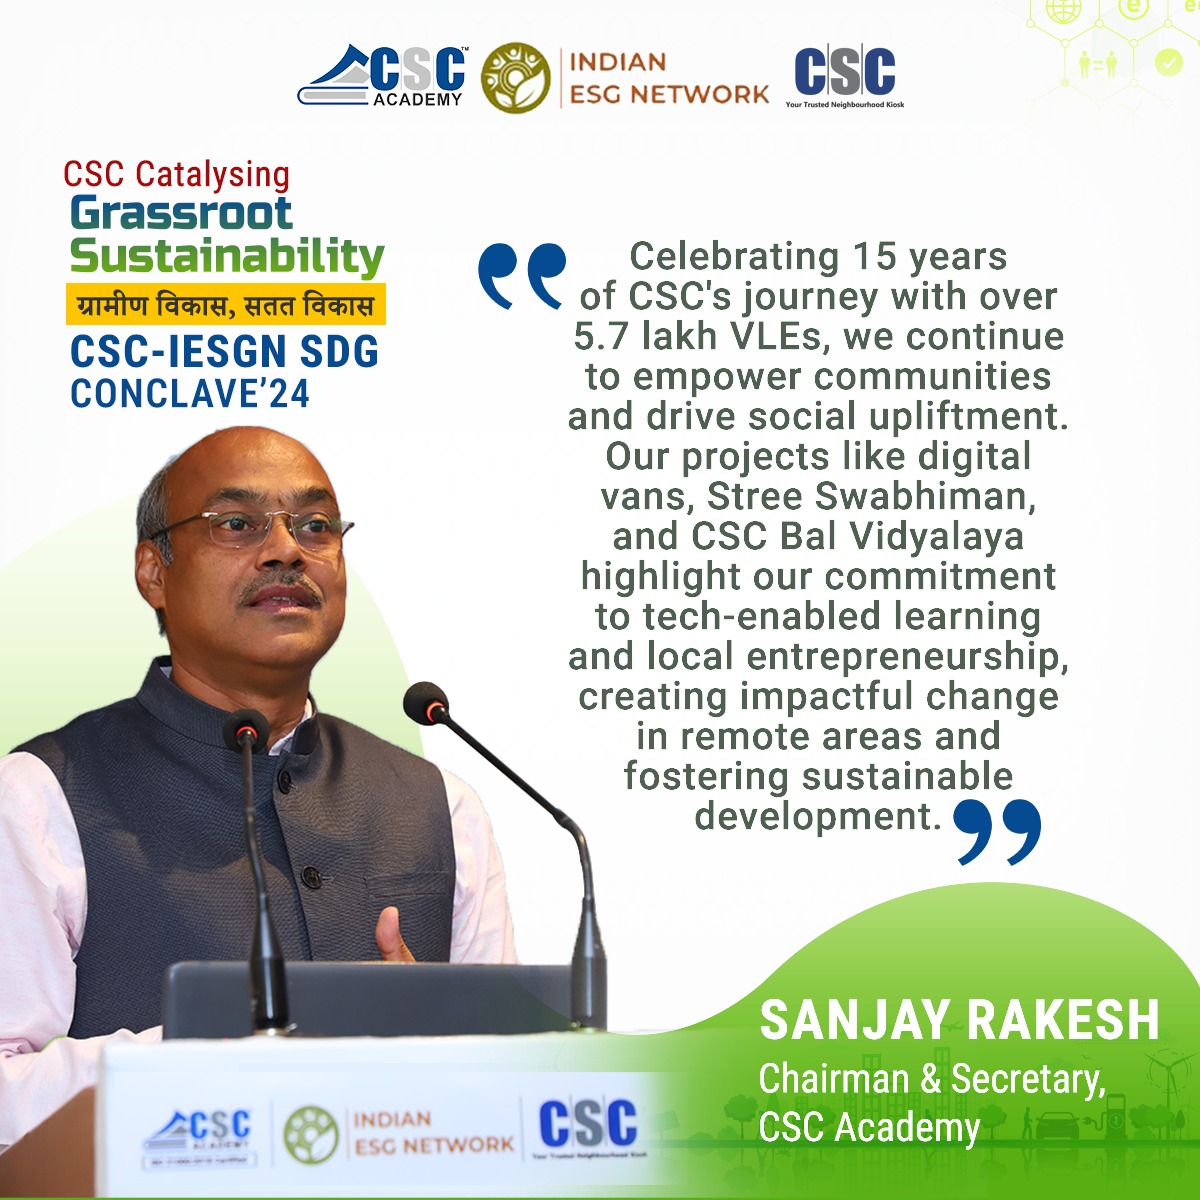 'With over 5.7 lakh VLEs we continue to empower communities and drive social upliftment through initiatives like Digital Vans, Stree Swabhiman, and CSC Bal Vidyalaya, in remote areas, fostering sustainable development' - @sanjaykrakesh, Chairman & Secretary, CSC Academy